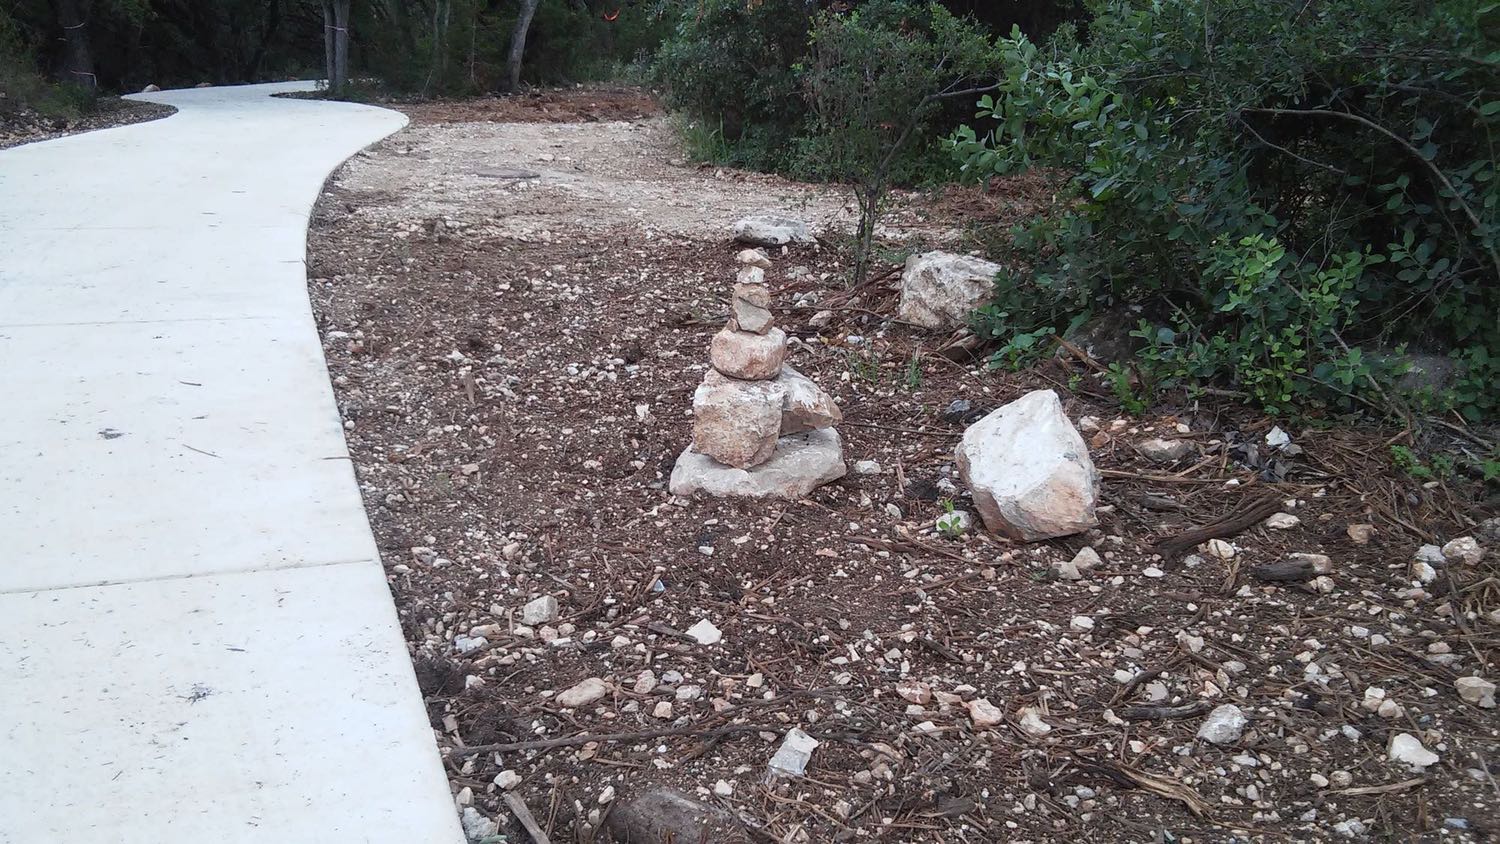 A rock figure appears to be standing on guard